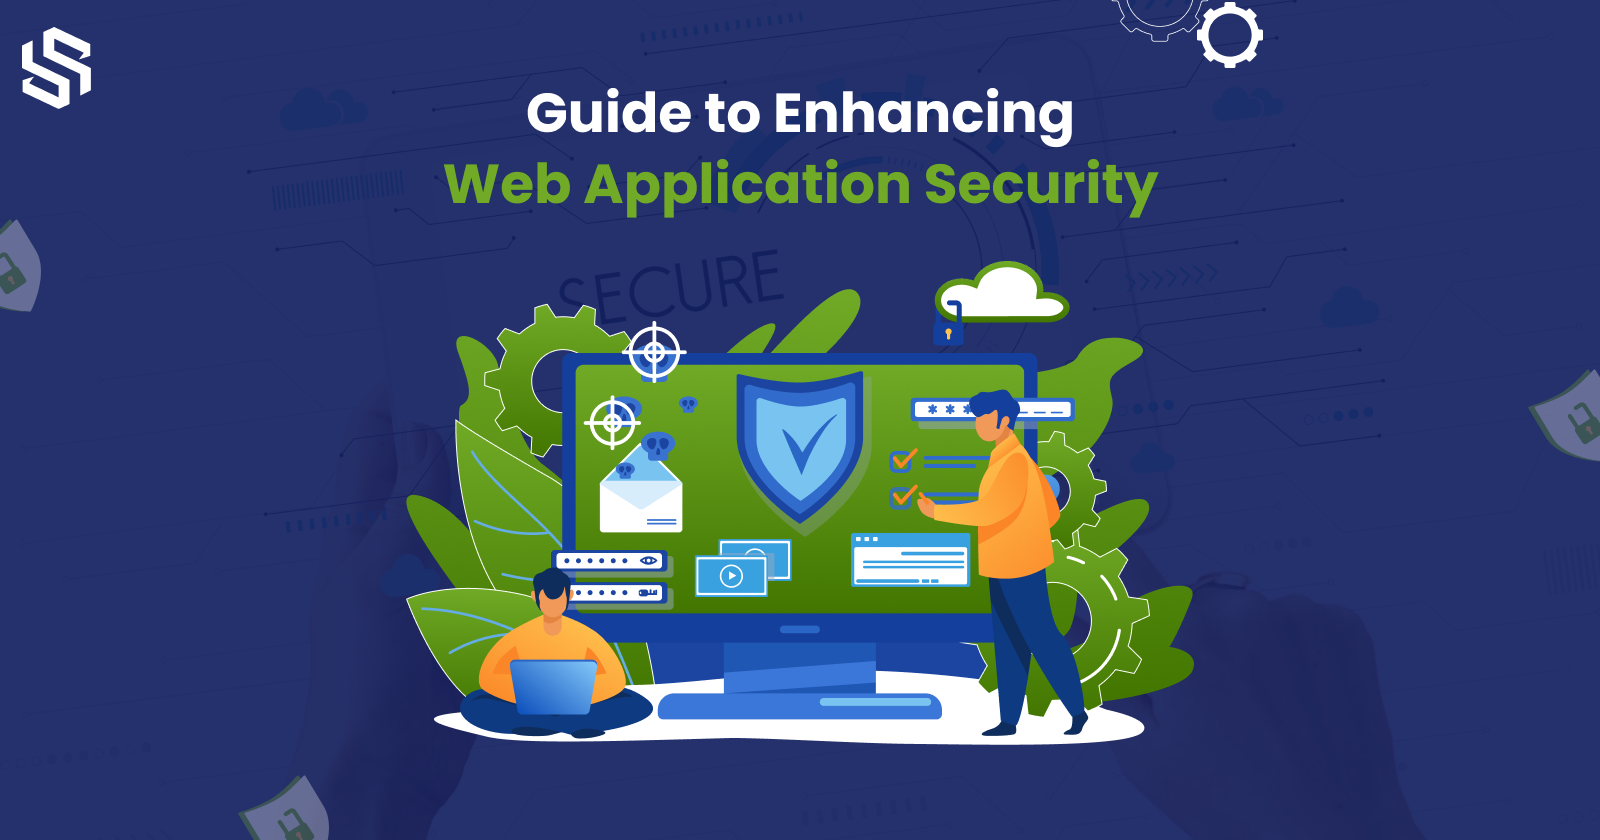 Guide to Enhancing Web Application Security